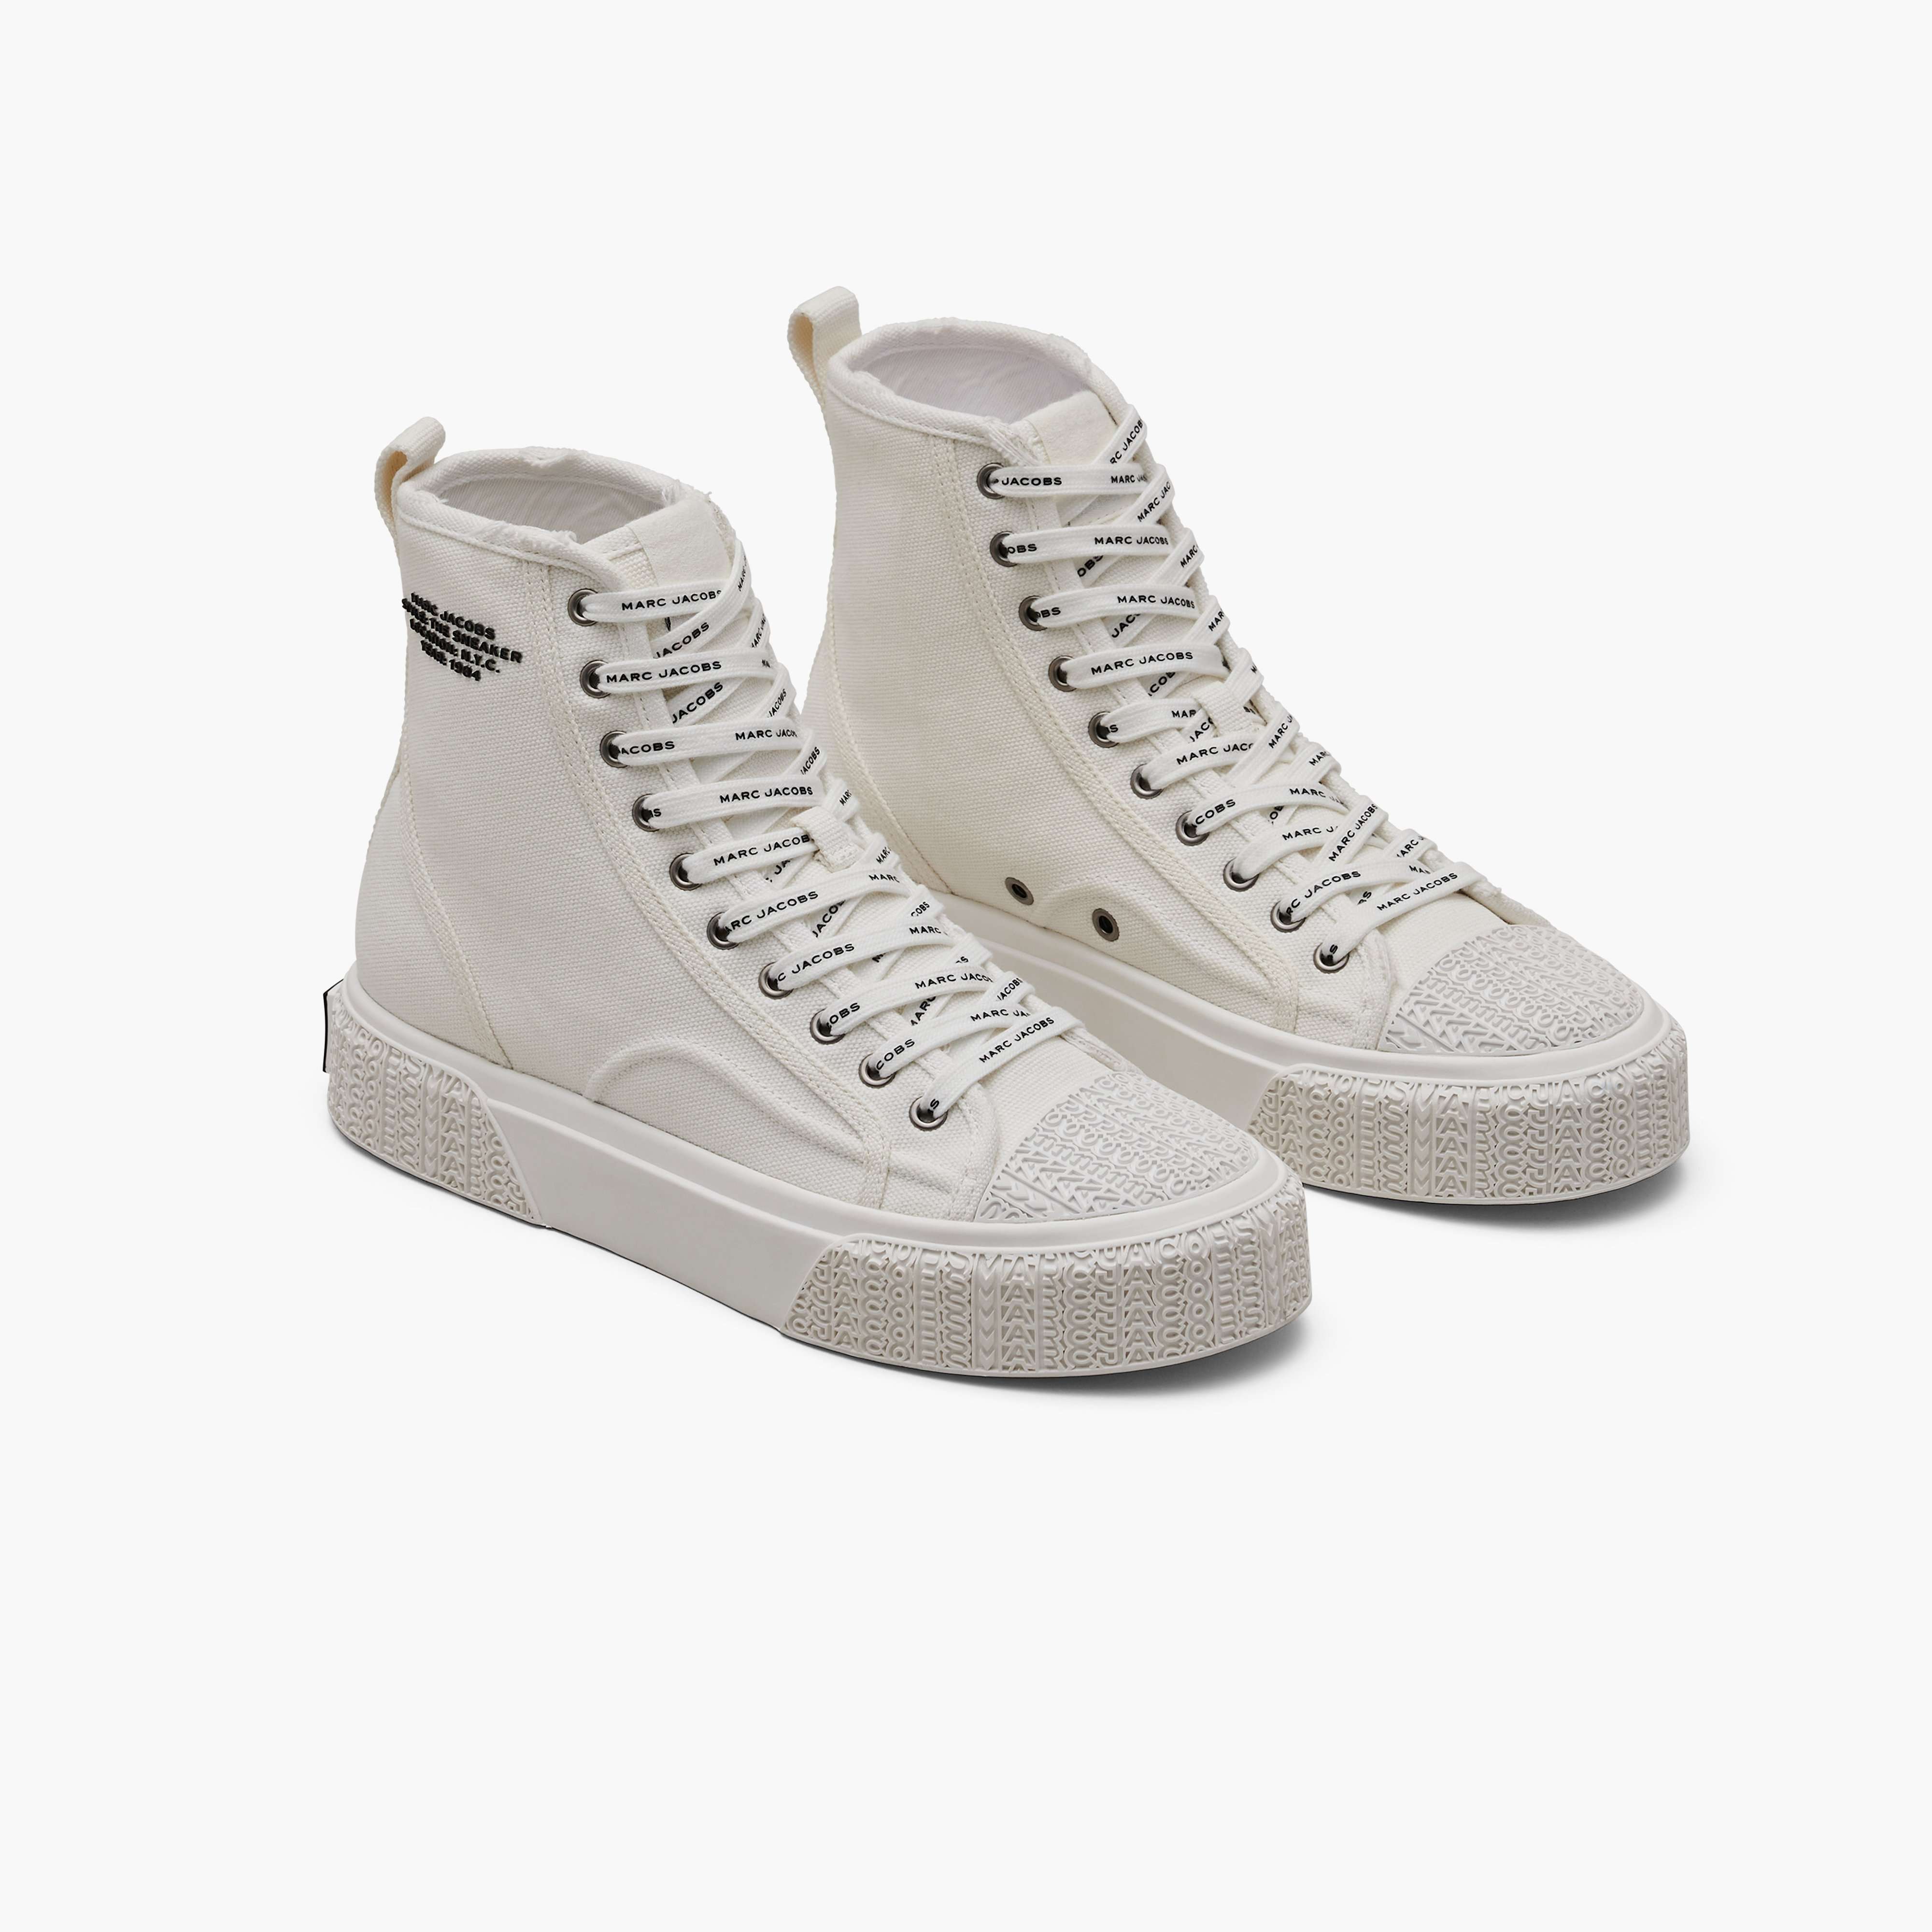 The High Top Sneaker in White